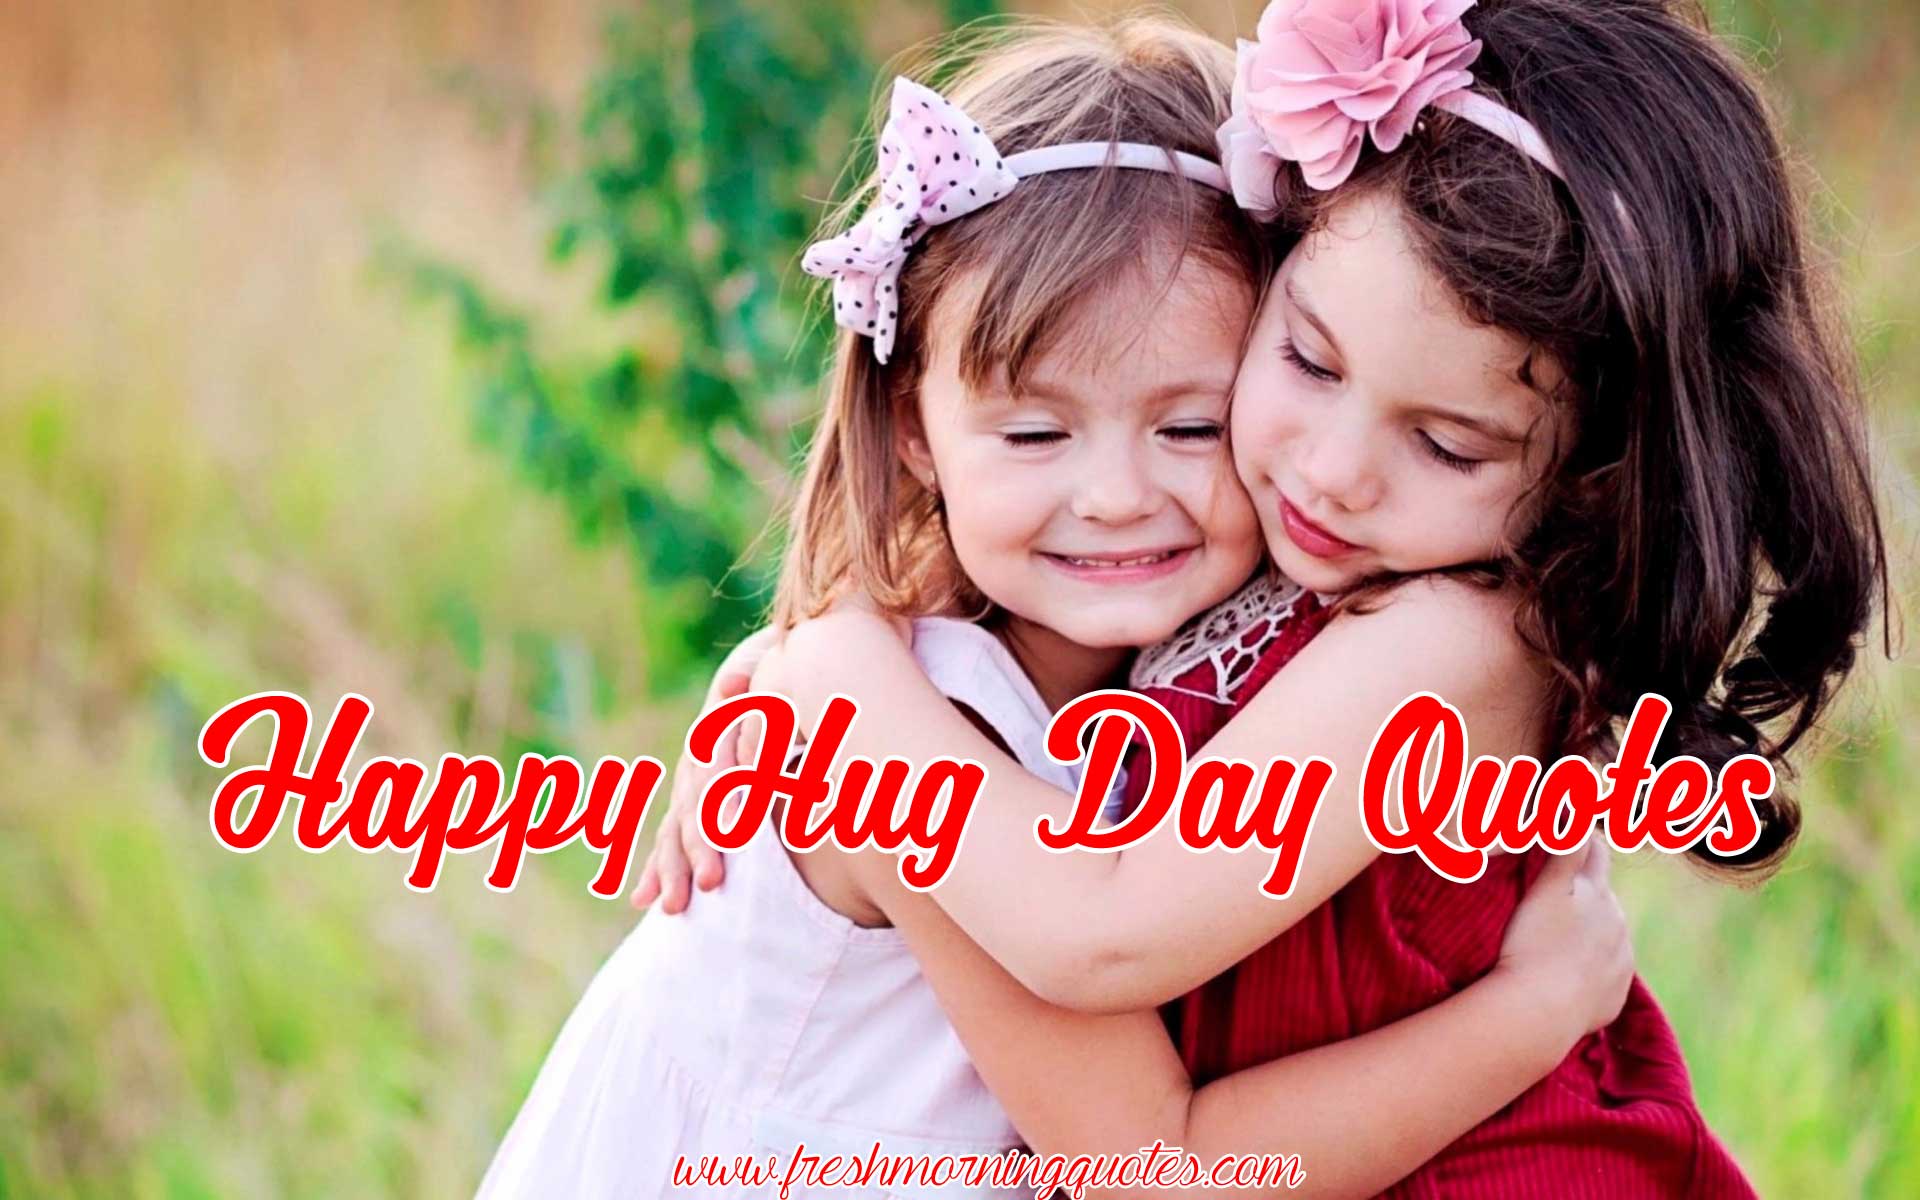 We have here is the most beautiful collection of Hug Day 2016